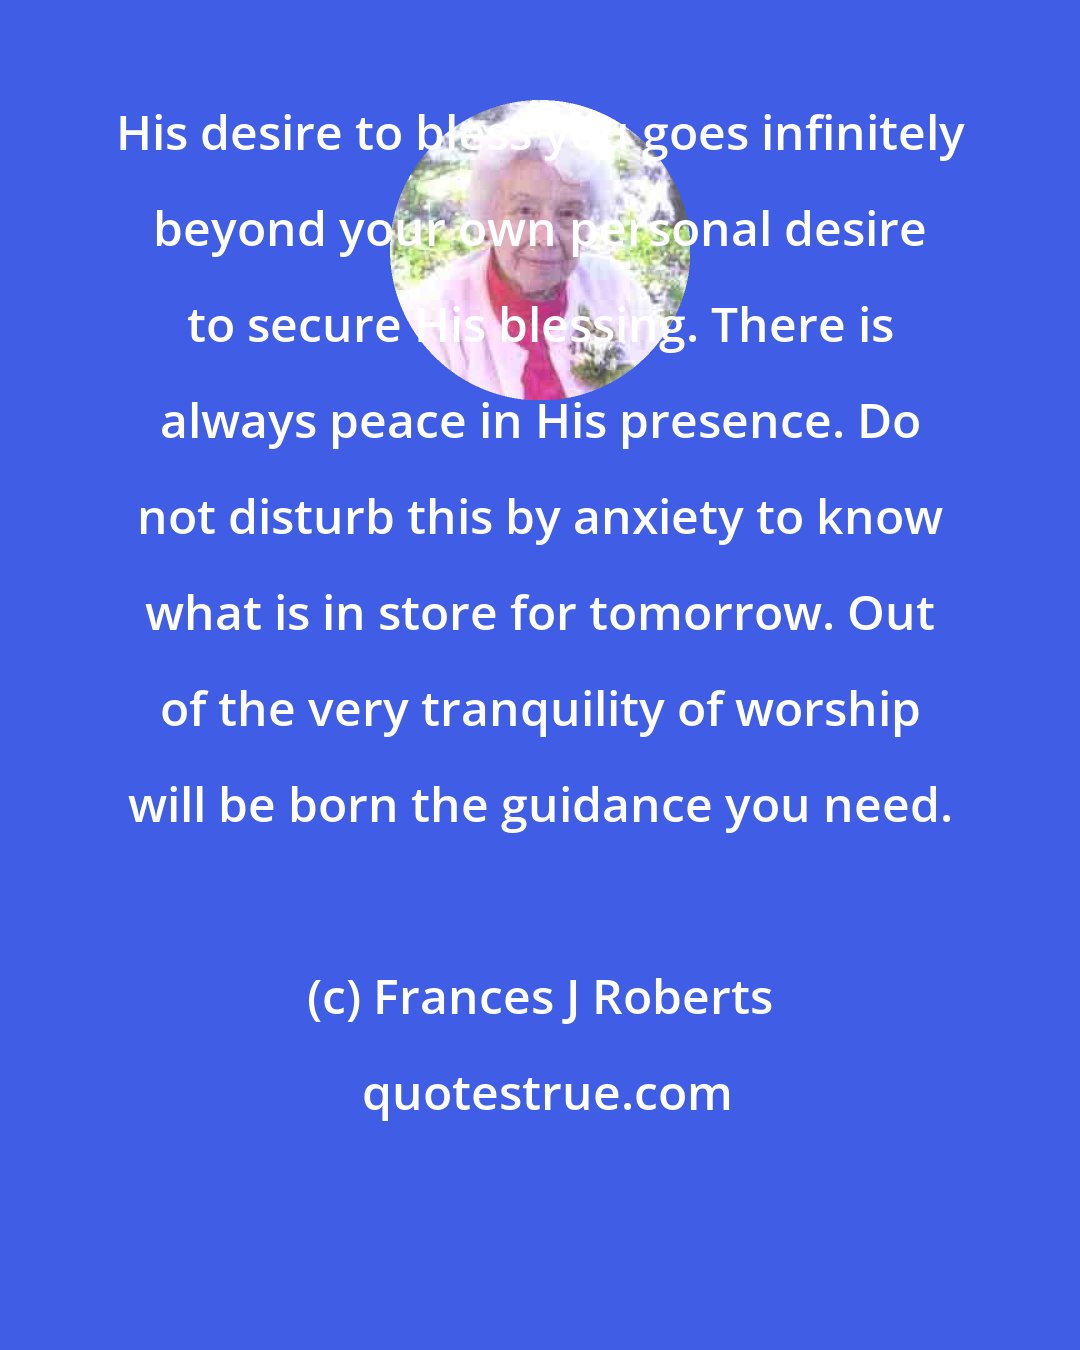 Frances J Roberts: His desire to bless you goes infinitely beyond your own personal desire to secure His blessing. There is always peace in His presence. Do not disturb this by anxiety to know what is in store for tomorrow. Out of the very tranquility of worship will be born the guidance you need.